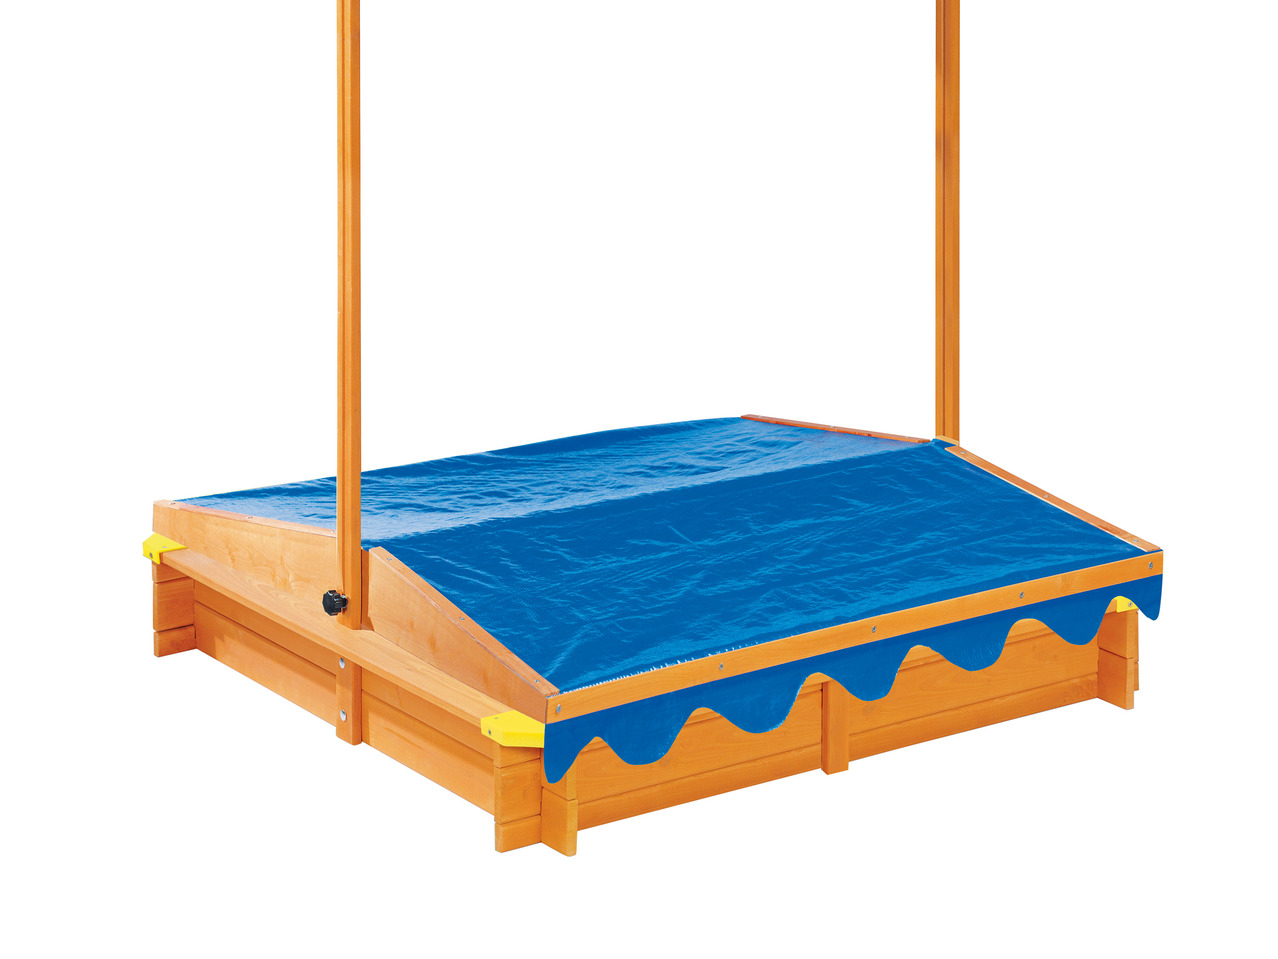 Playtive Junior Sandpit with Roof1